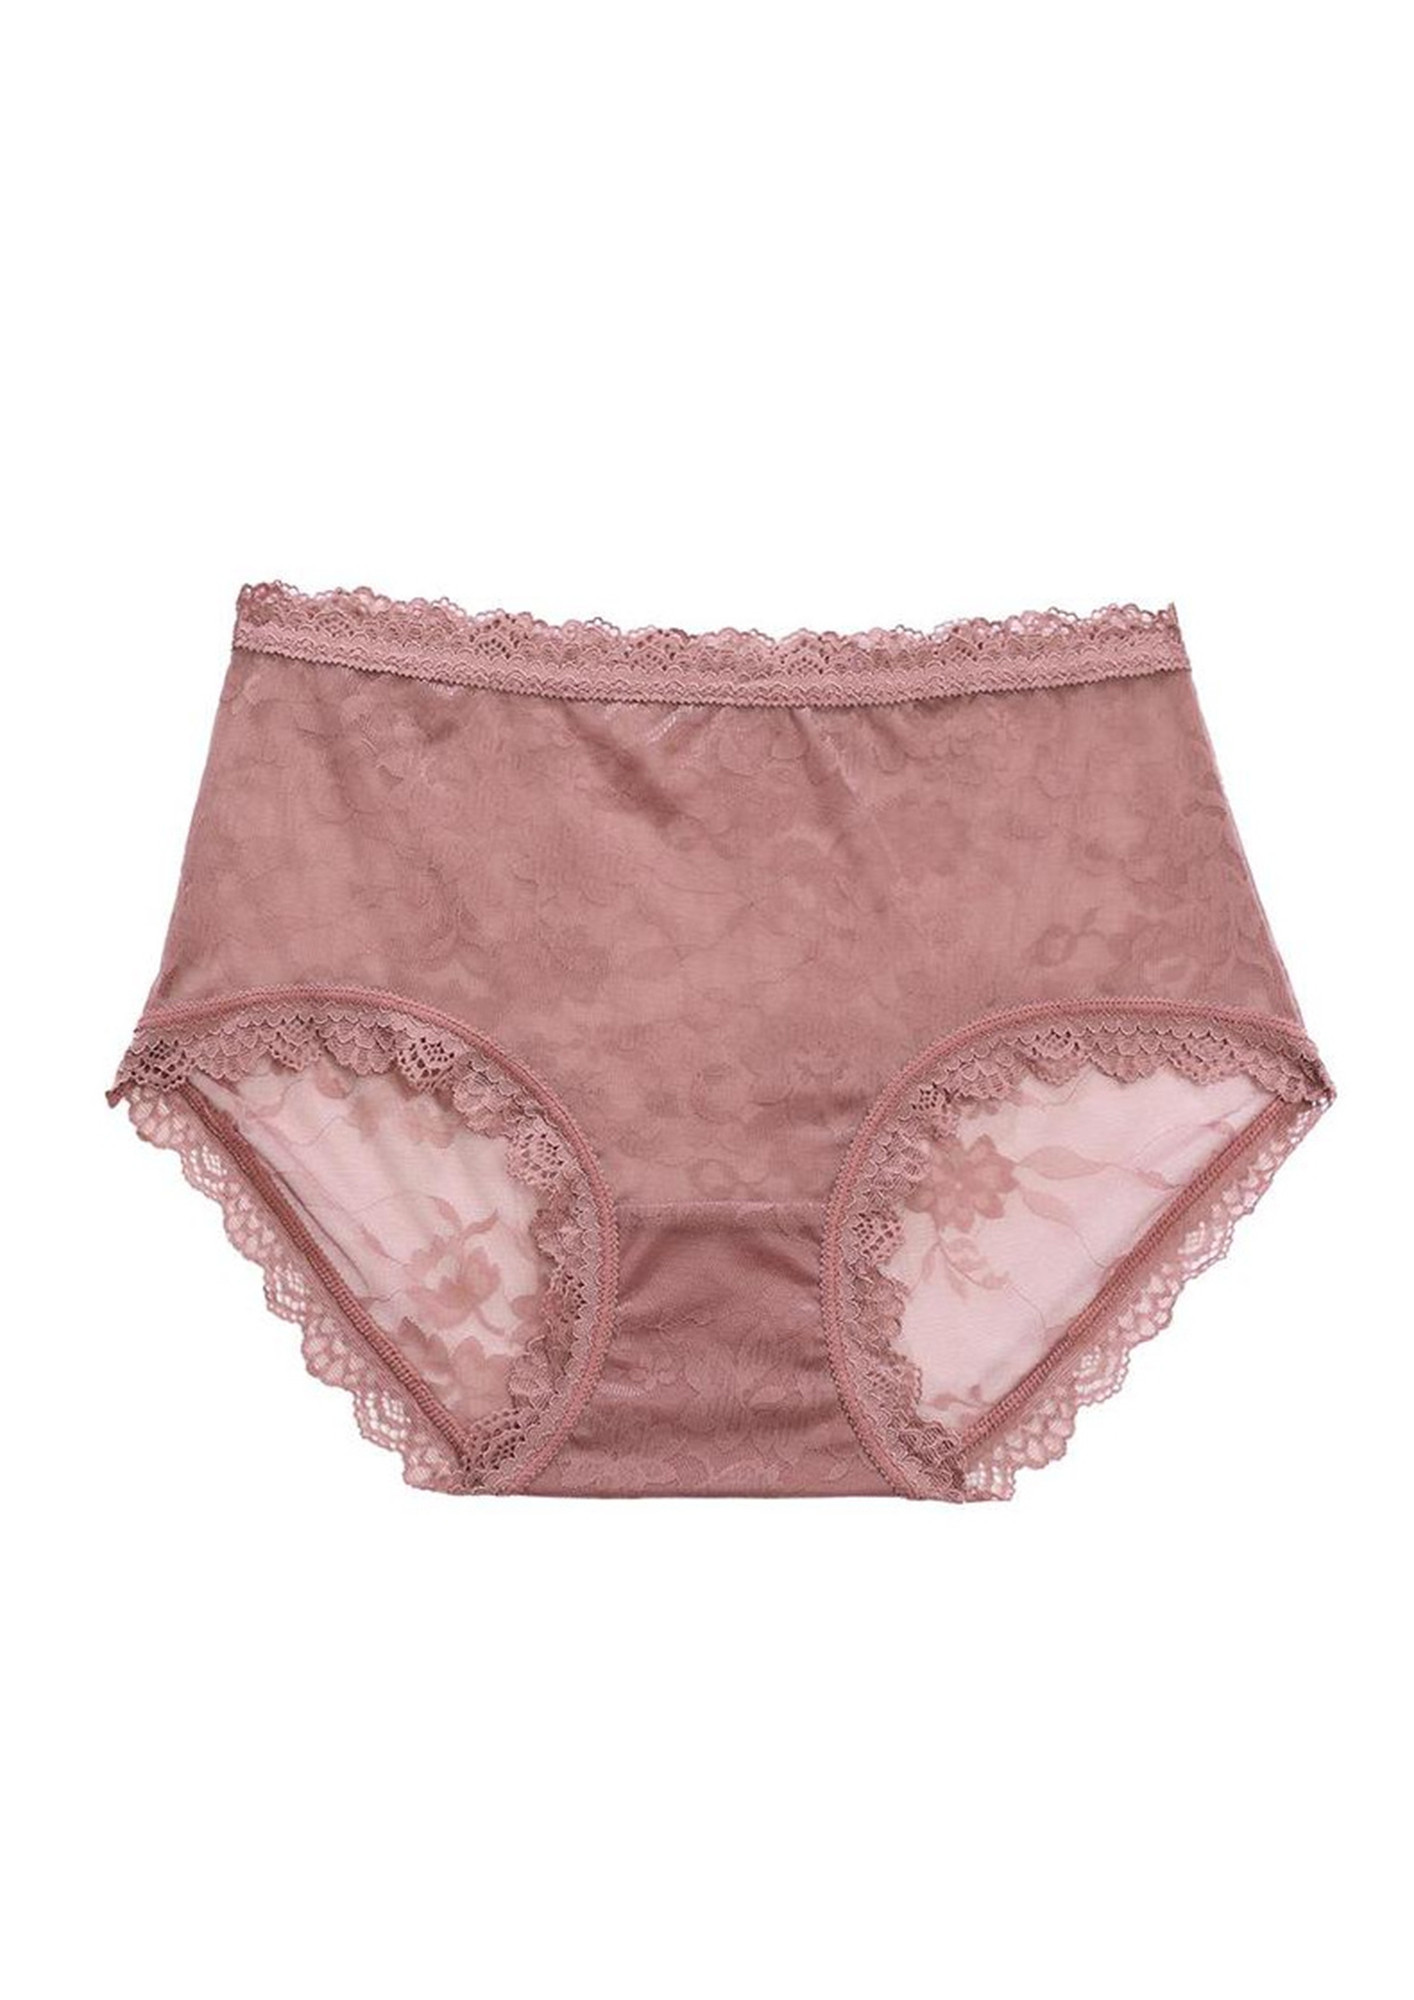 FANCY LOW-RISE LACY HIPSTER BRIEF